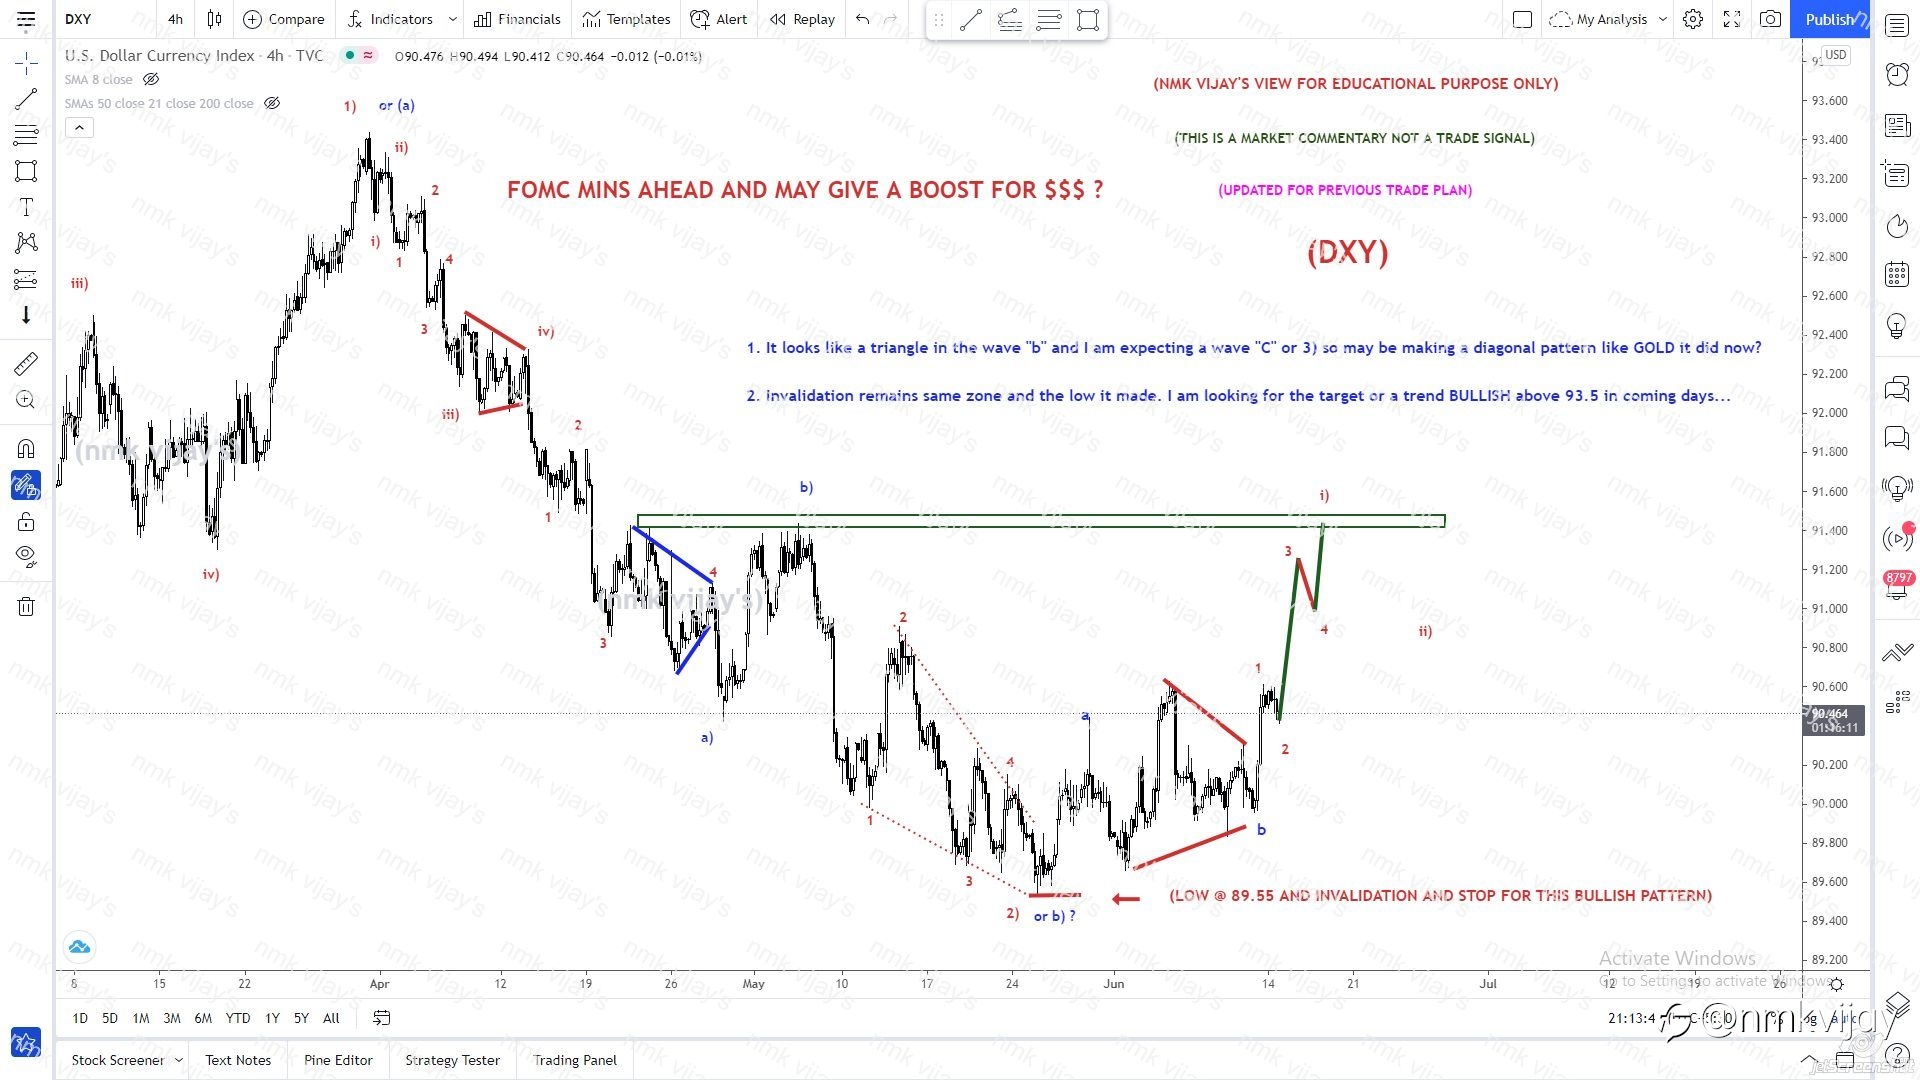 DXY-Making a diagonal pattern in wave 3) or C) ?